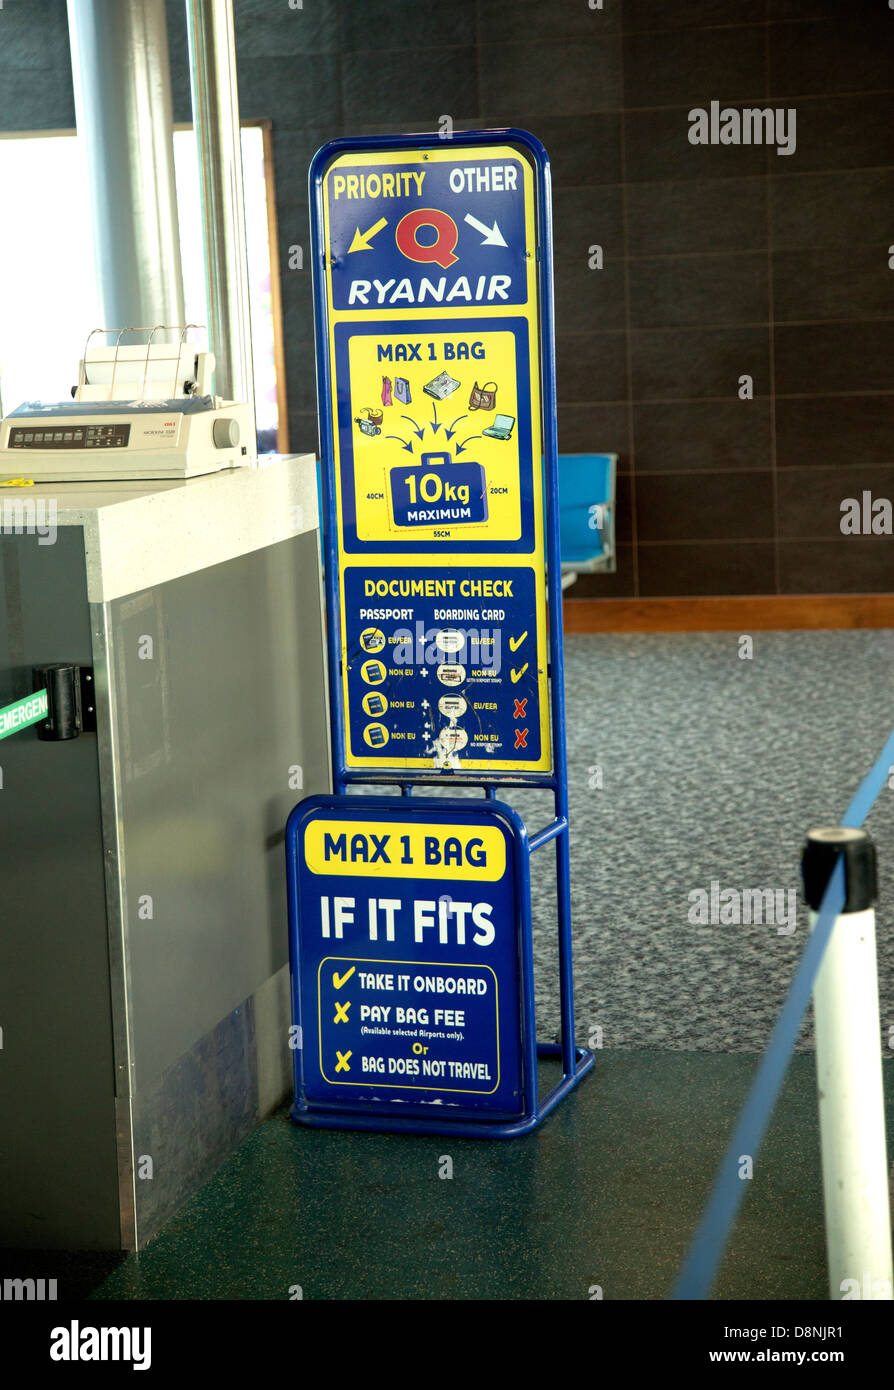 Ryanair Baggage High Resolution Stock Photography and Images - Alamy